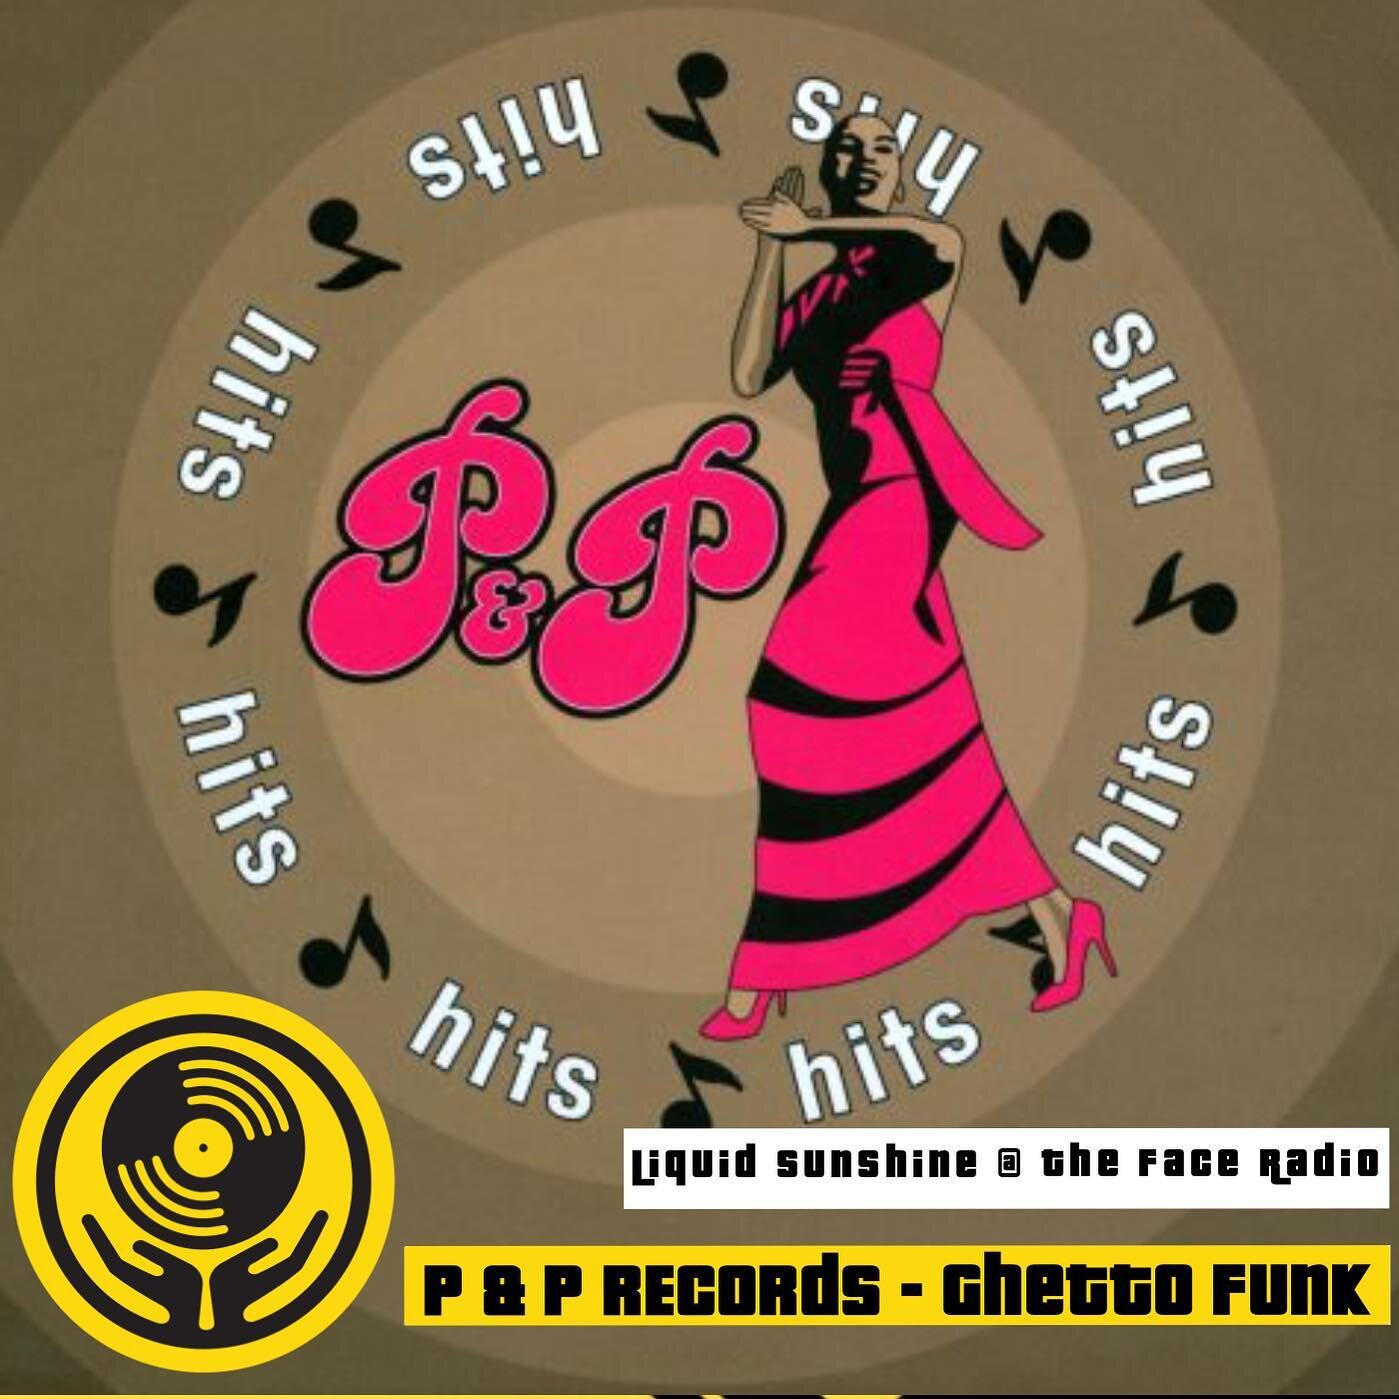 Get in the groove with some stomping Ghetto Funk from the P&amp;P Records label. 

Soundcloud:
https://soundcloud.com/liquidsunshinesoundsystem/show-44-pp-records-nyc-ghetto-funk-liquid-sunshine-the-face-radio-09-02-2021

Or sign up for the podcast:
